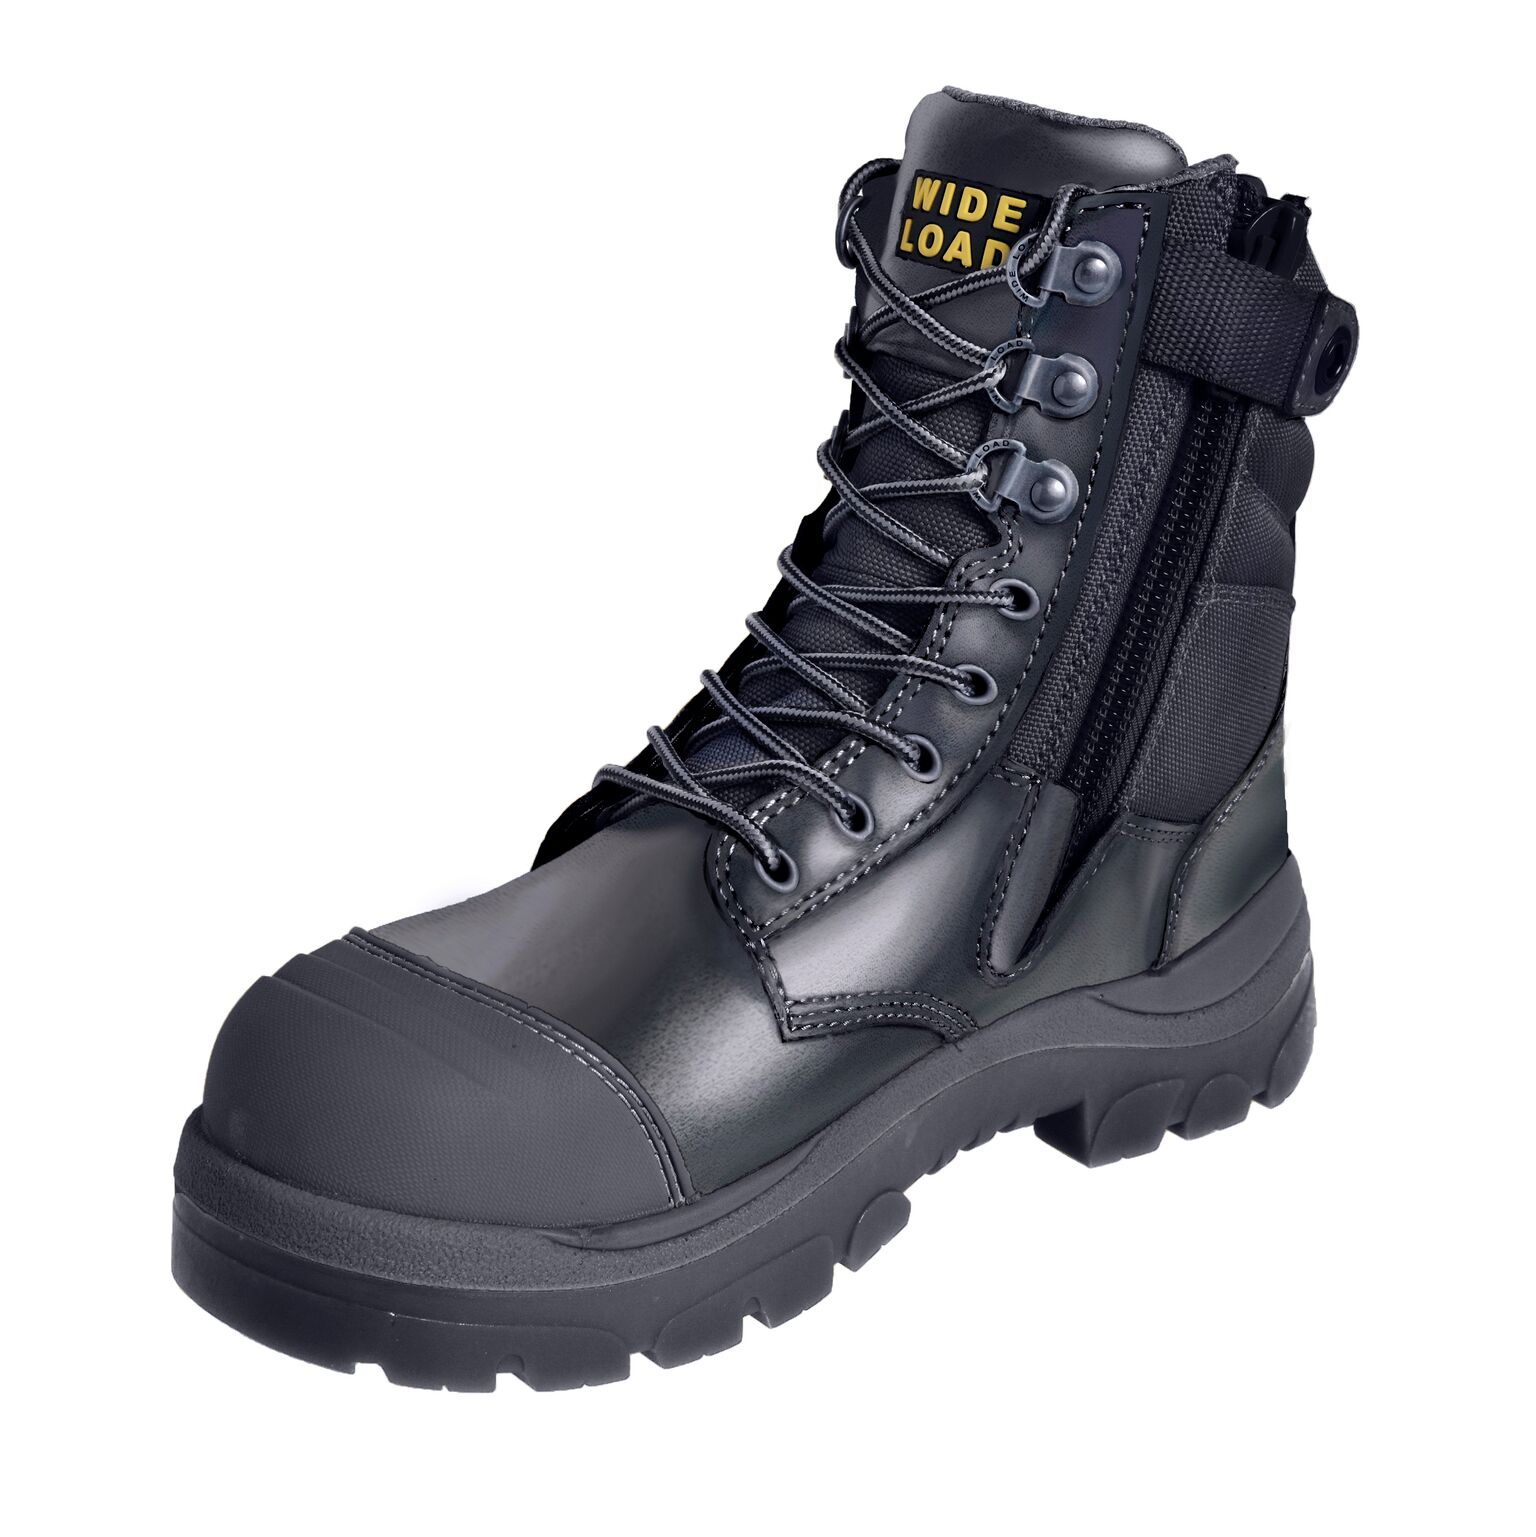 Wide Load Black Oil Kip 8'' Safety Steel Cap - Zip Sided Boot | Xtreme ...